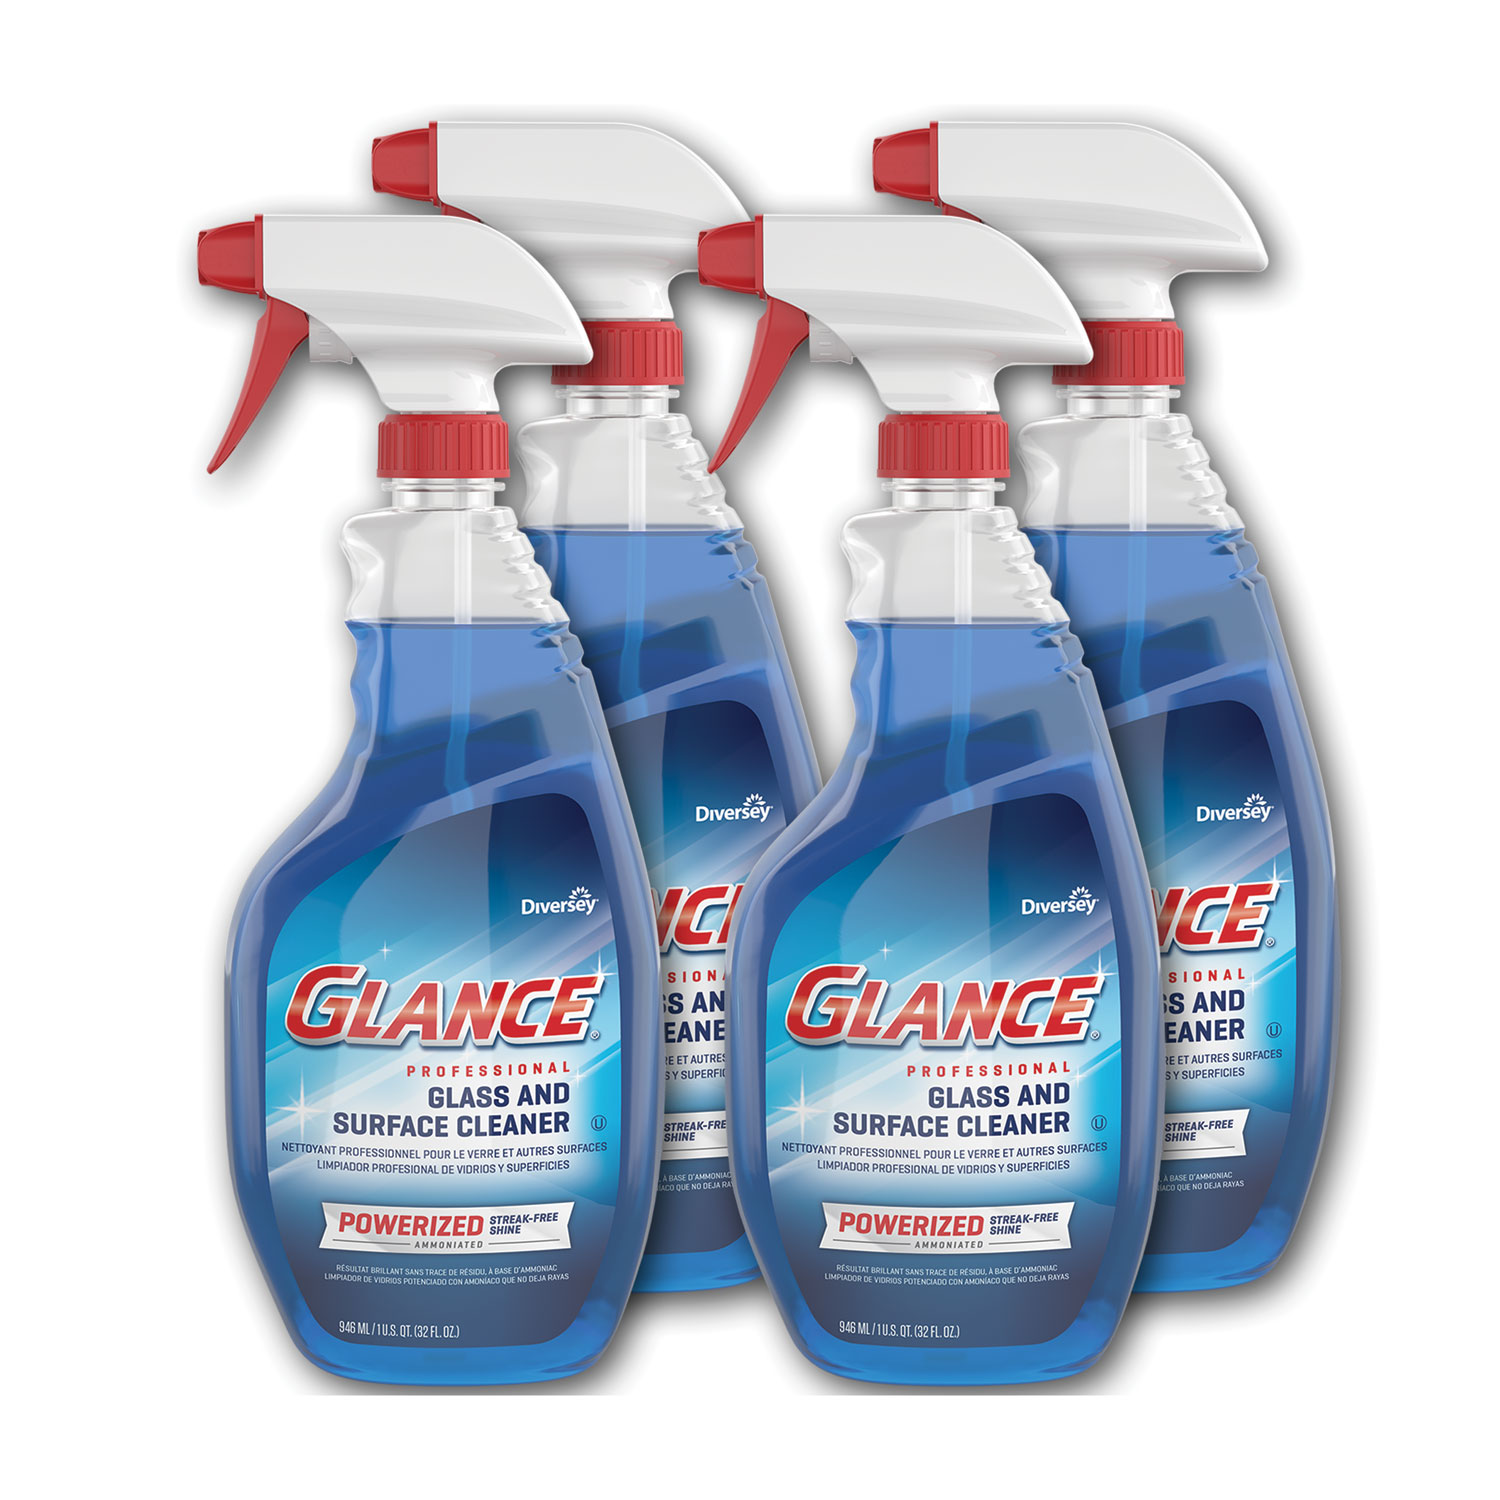 Clean surfaces. Glass surface Cleaner. Спрей Гланс. Professional Cleaner. Clean Glass professional.